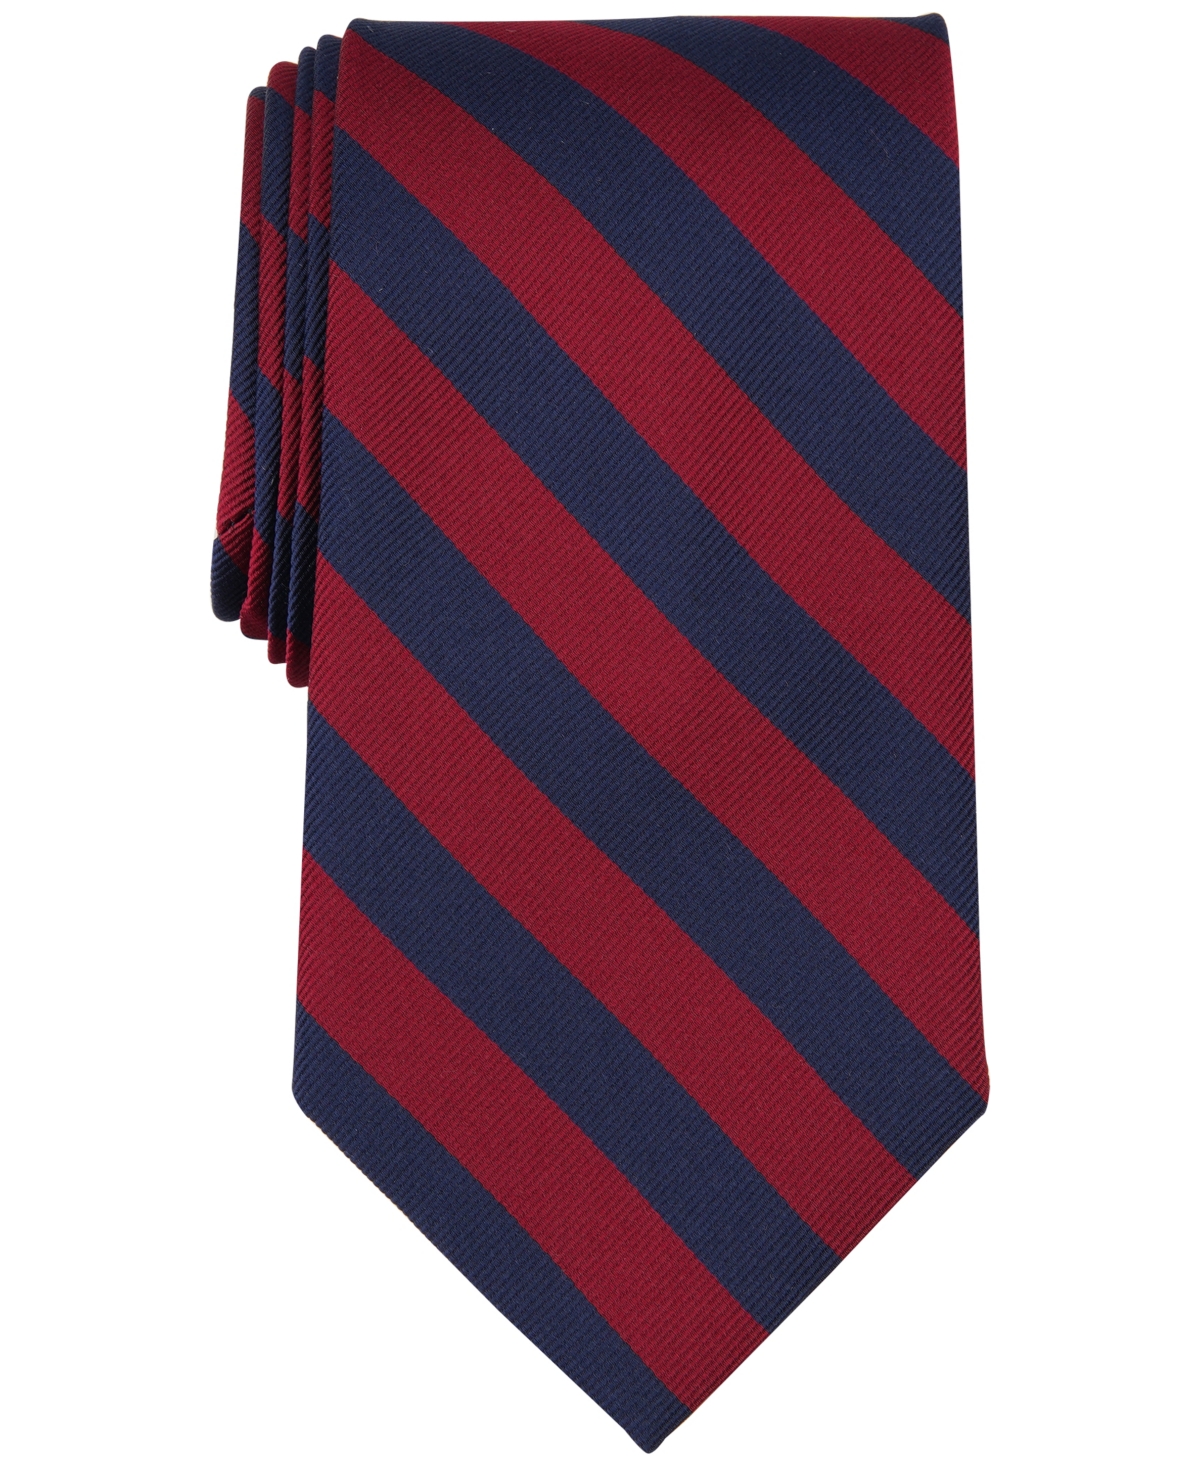 B by Brooks Brothers Men's Classic Double-Stripe Tie - Wine